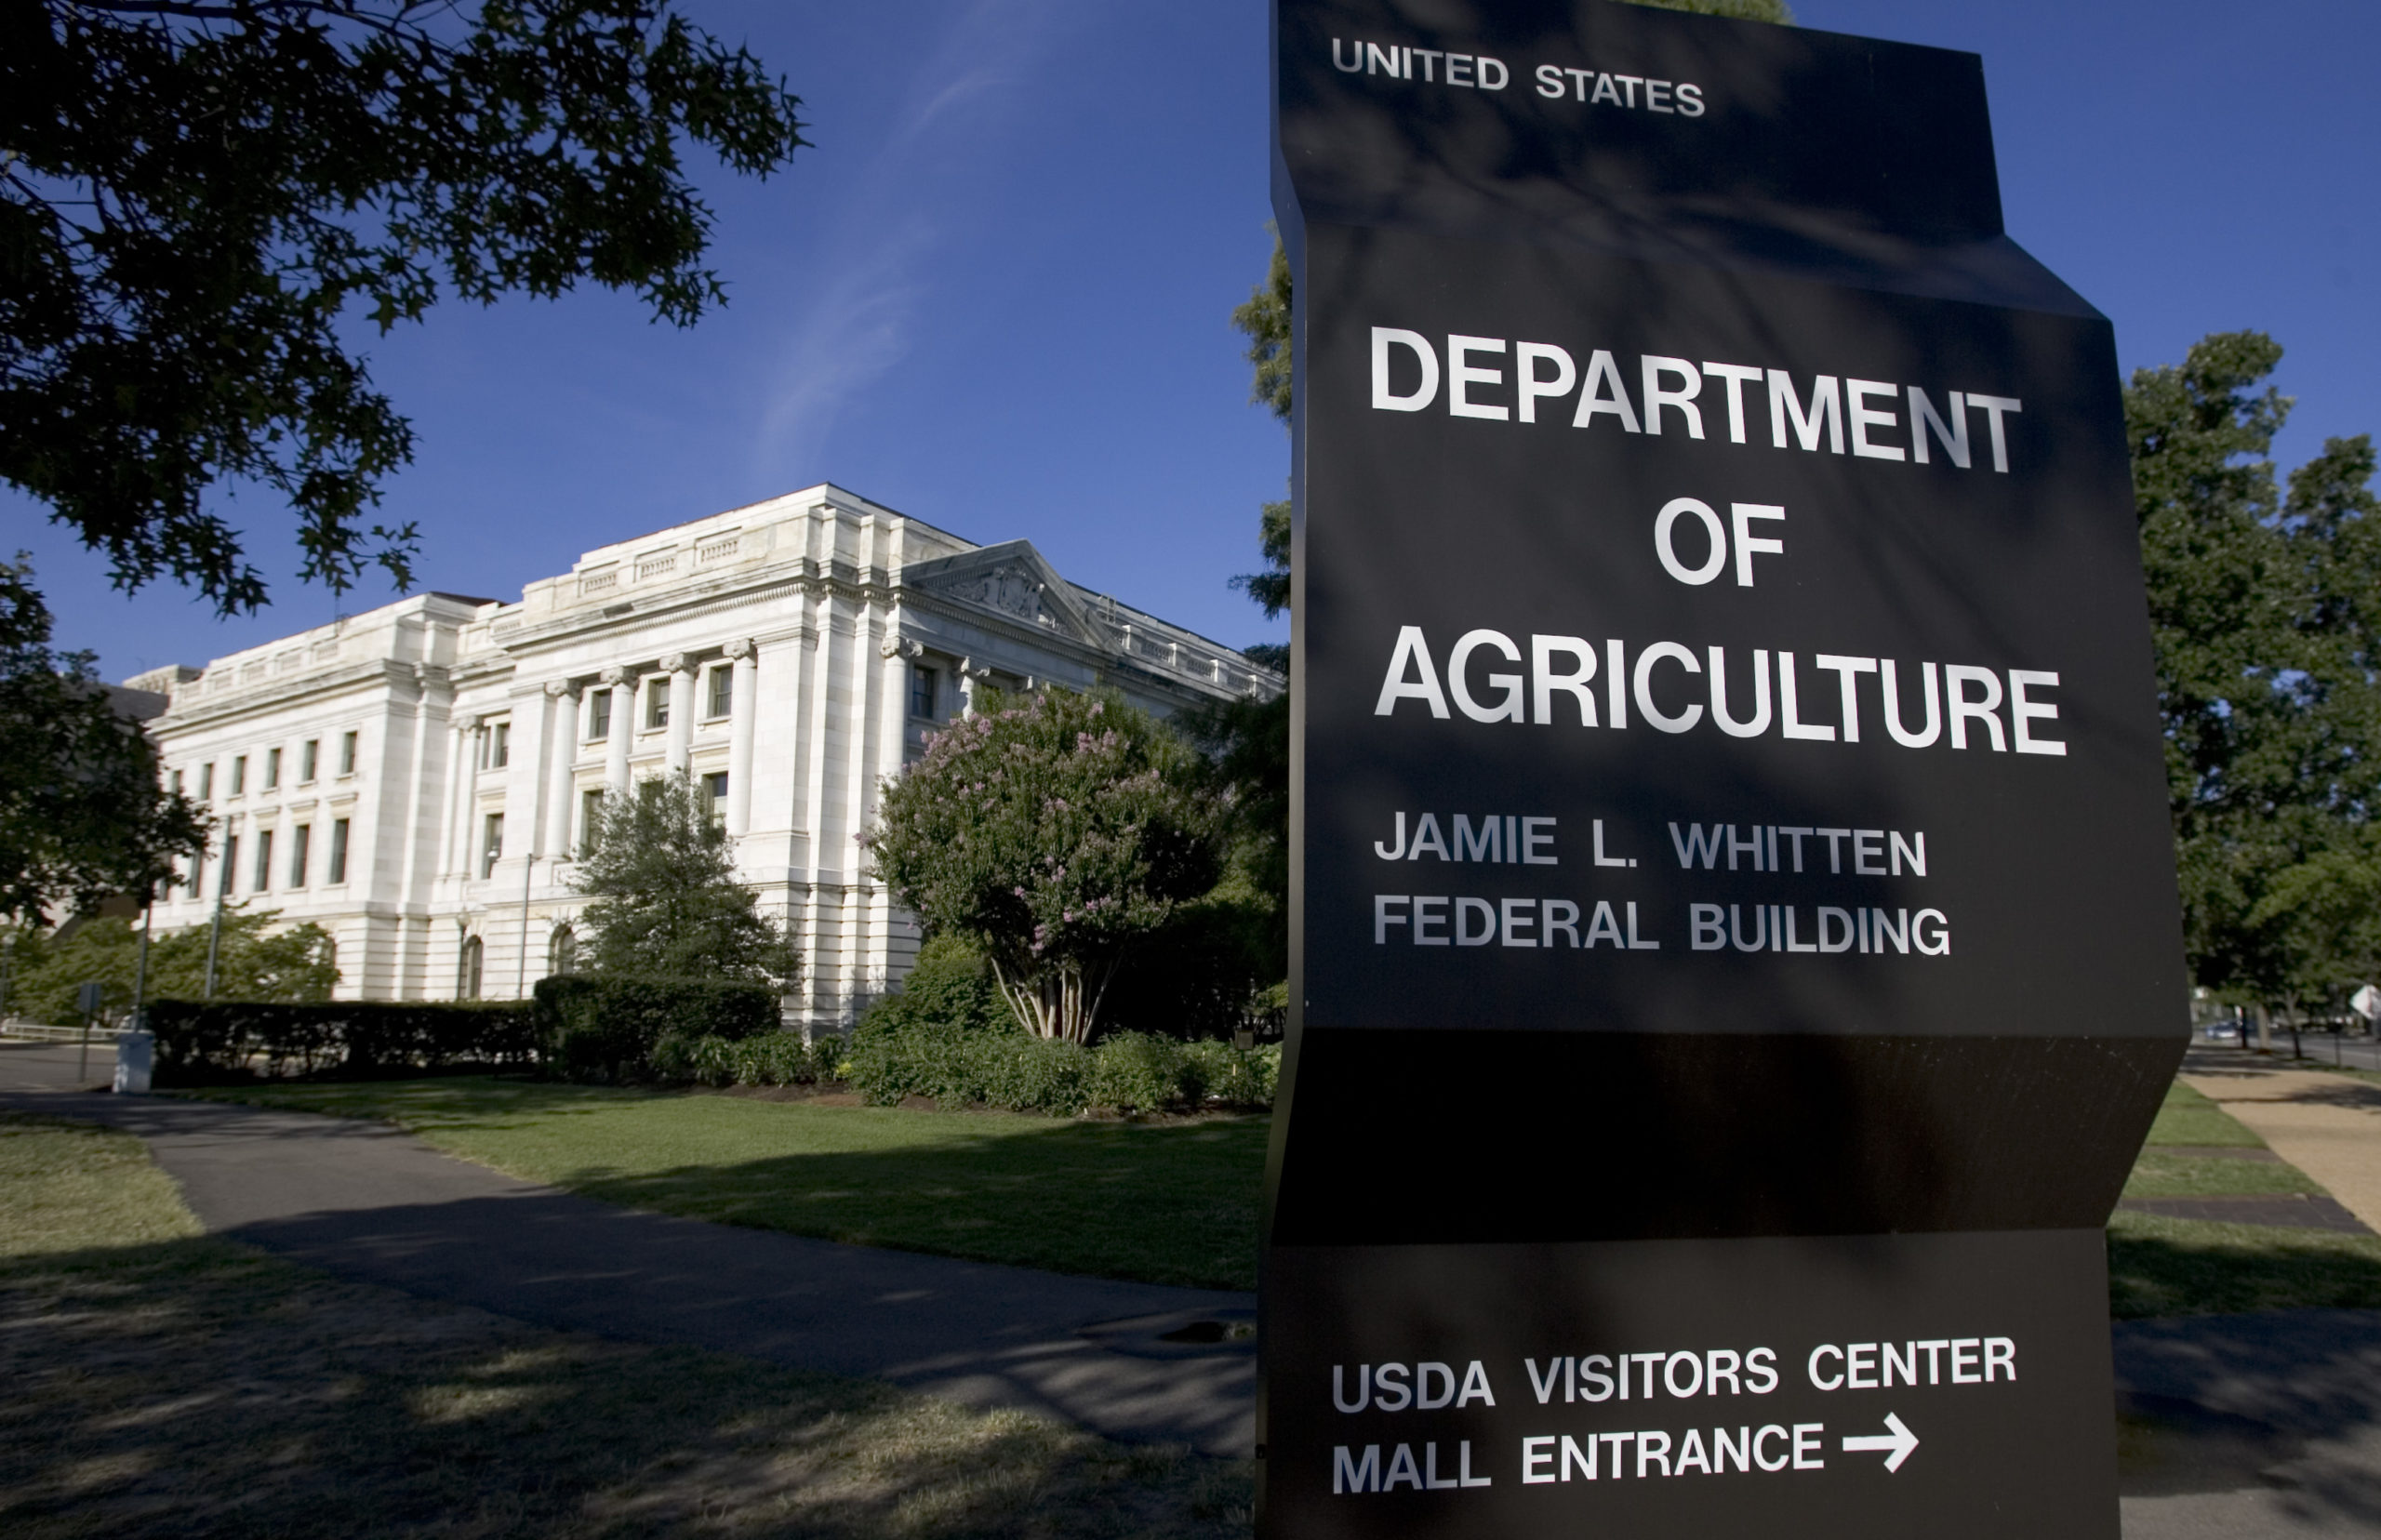 The US Department of Agriculture building is shown in Washington, DC, 21 July 2007. AFP PHOTO/SAUL LOEB (Photo by Saul LOEB / AFP) (Photo by SAUL LOEB/AFP via Getty Images)